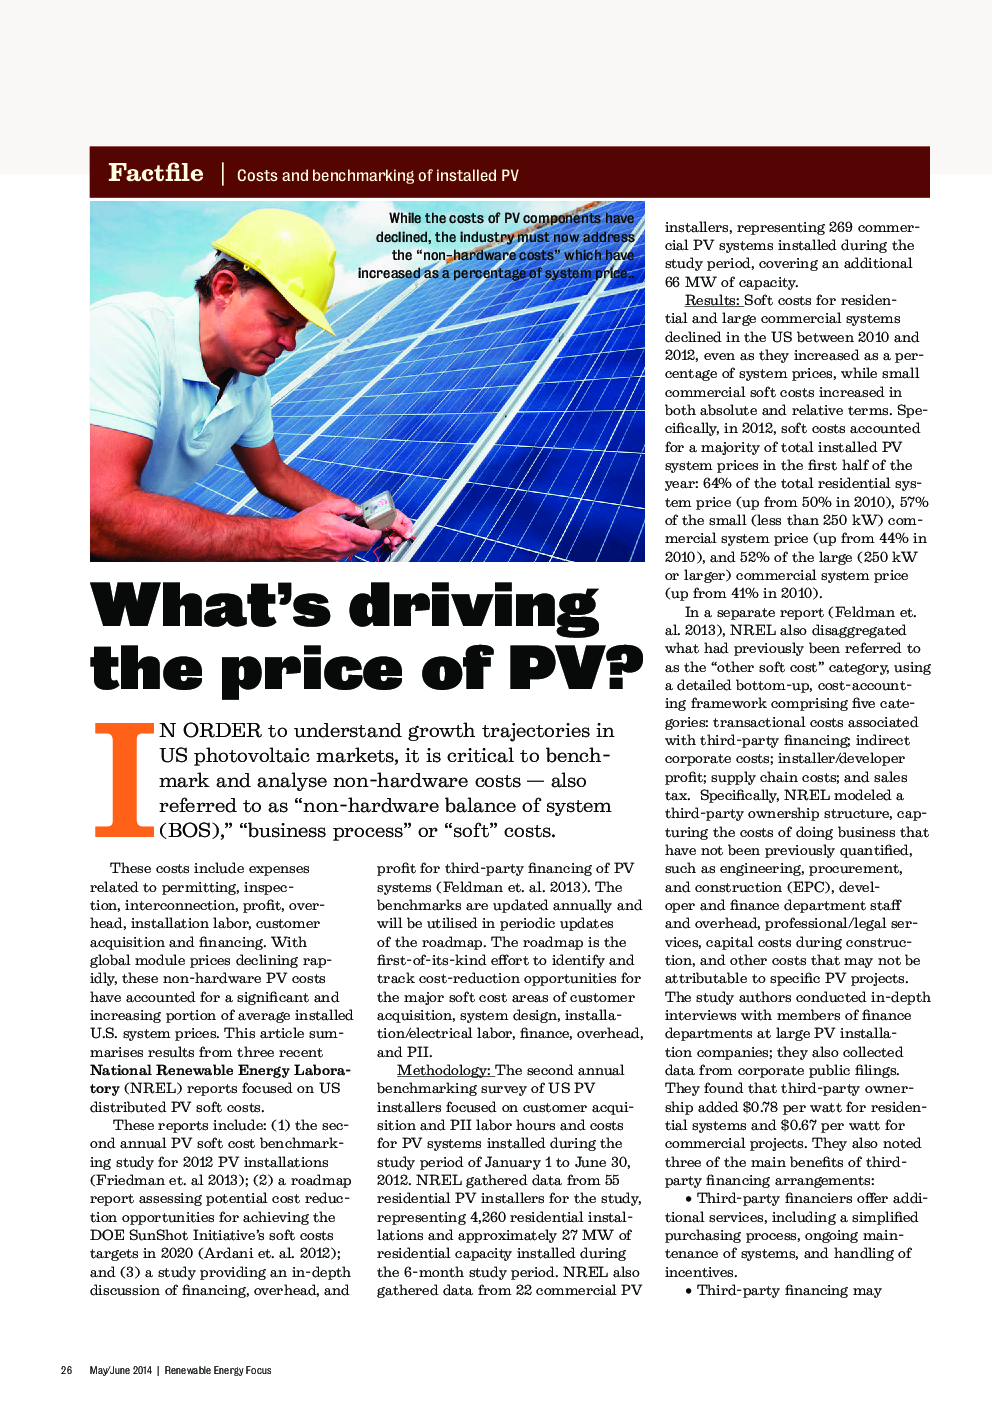 What's driving the price of PV?